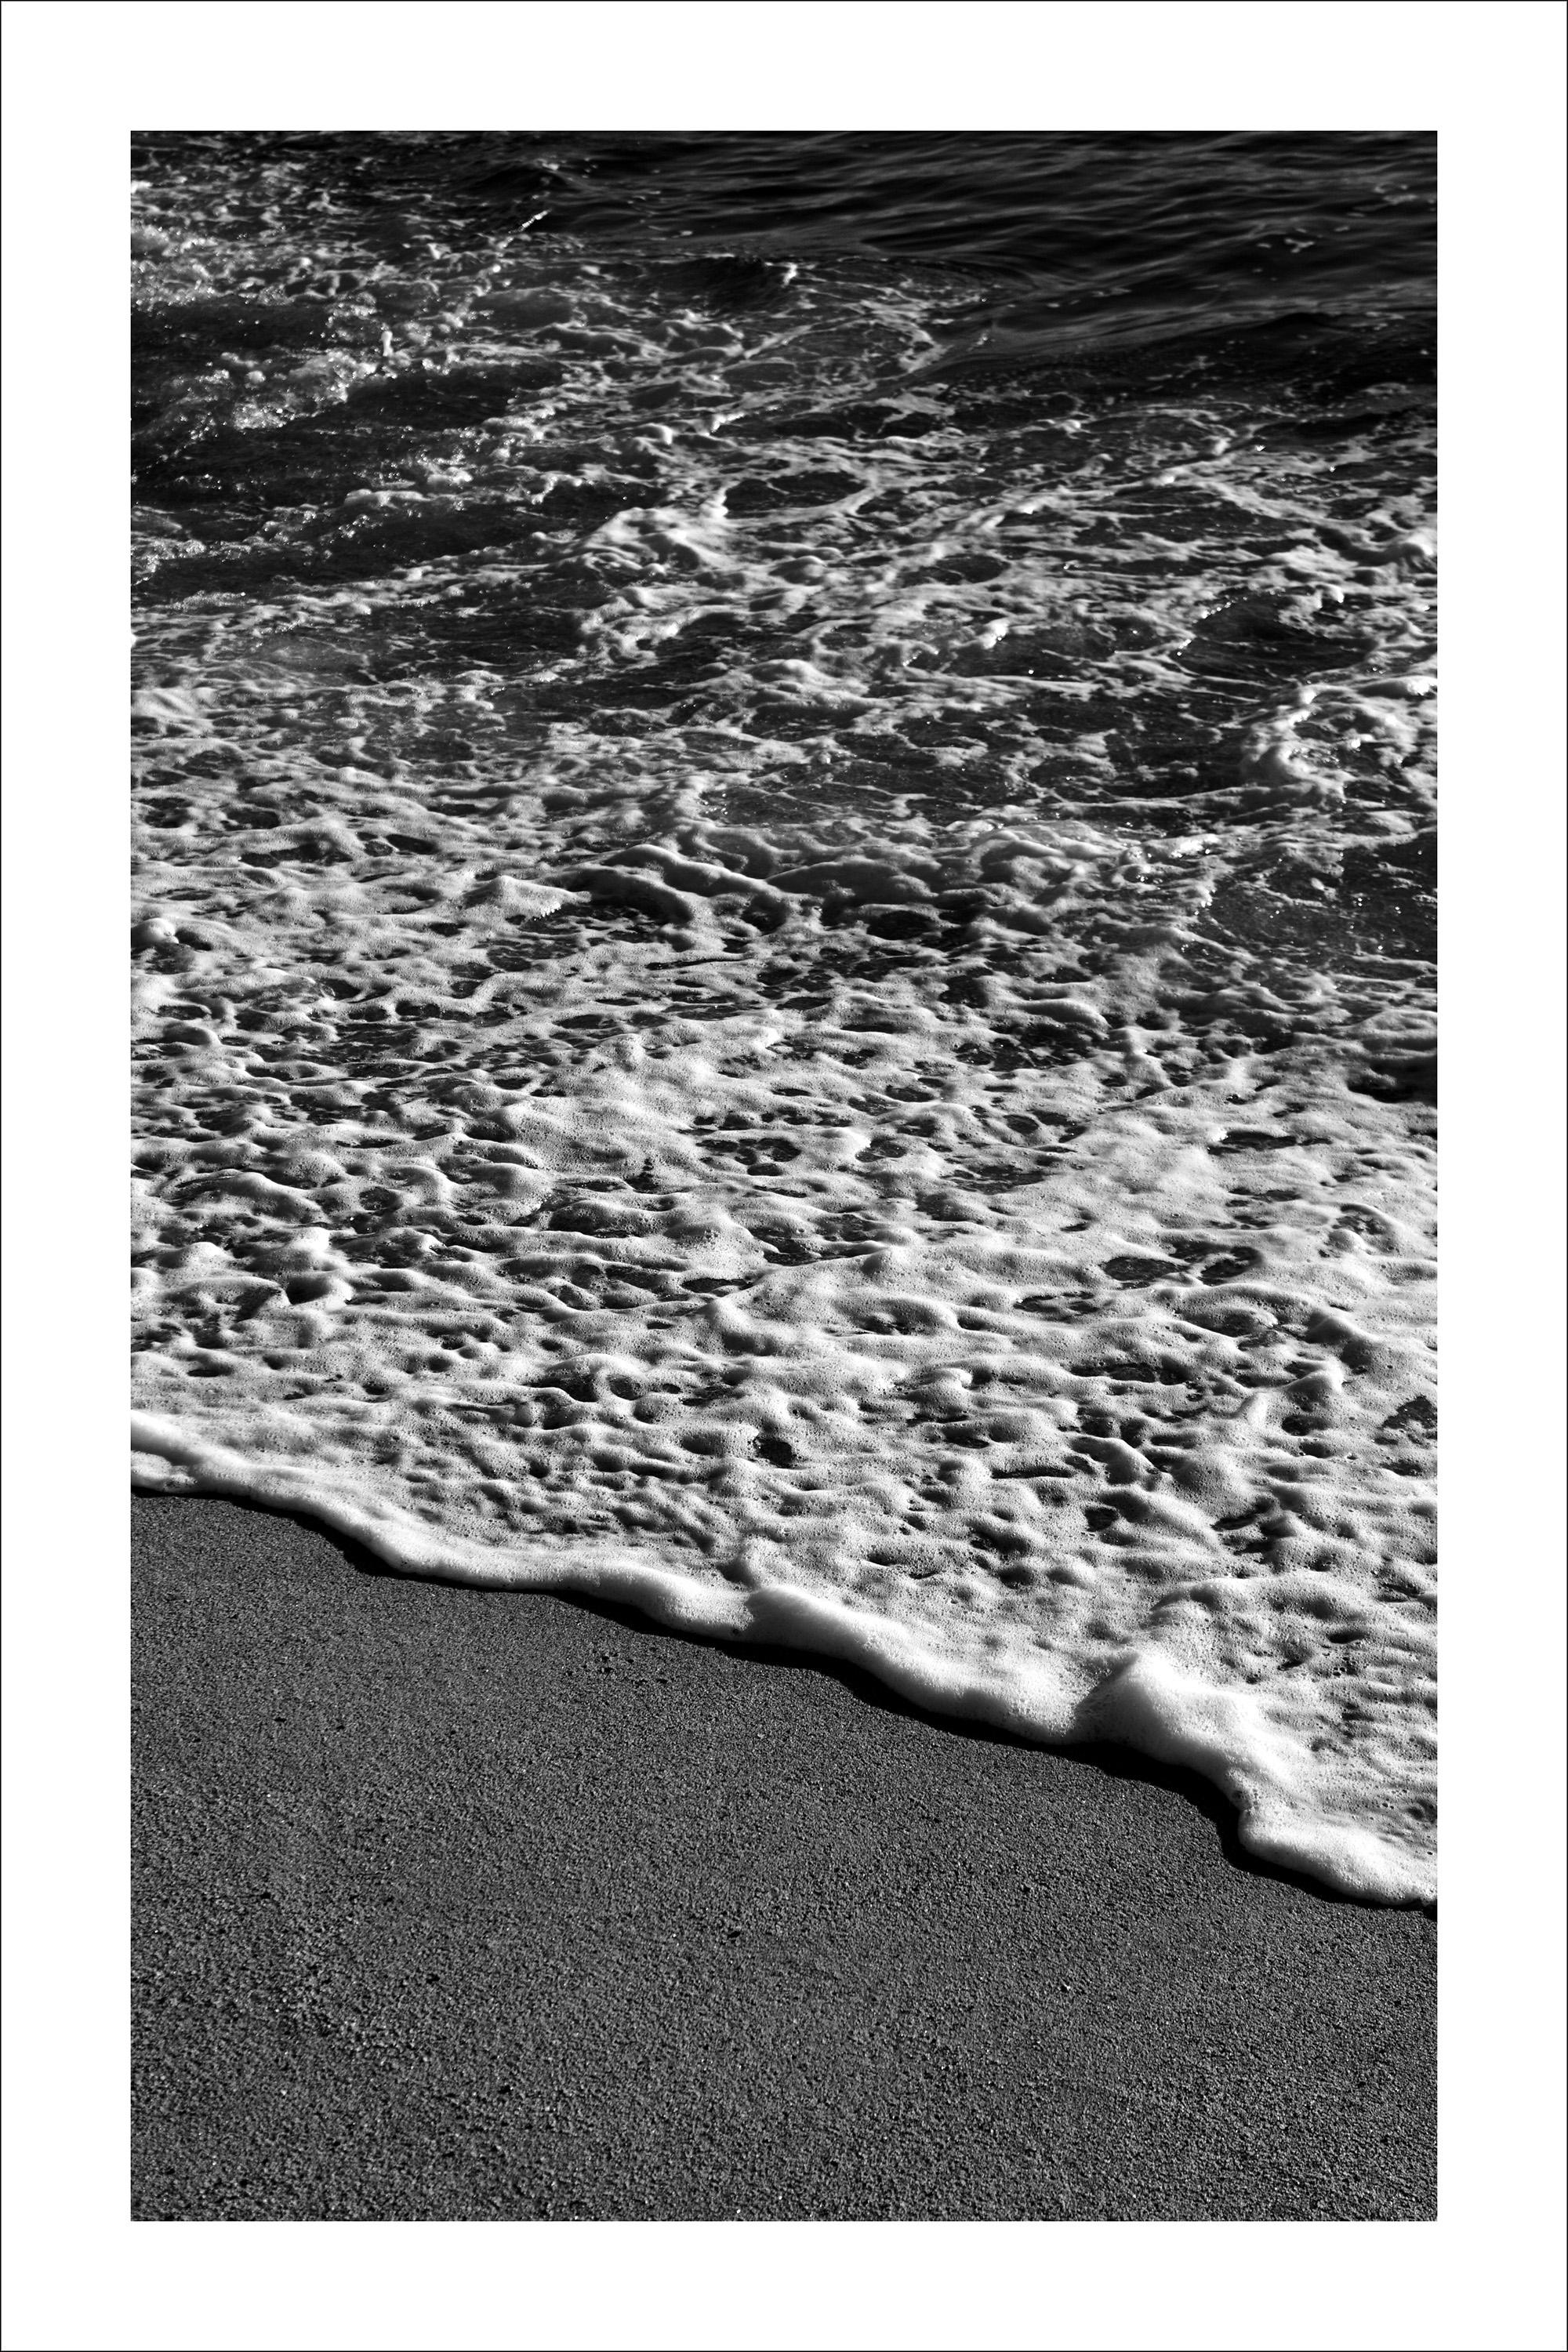 Landscape Photograph Kind of Cyan - Vertical Morning Seashore, Large Black and White Seascape Giclée, Sugimoto Style